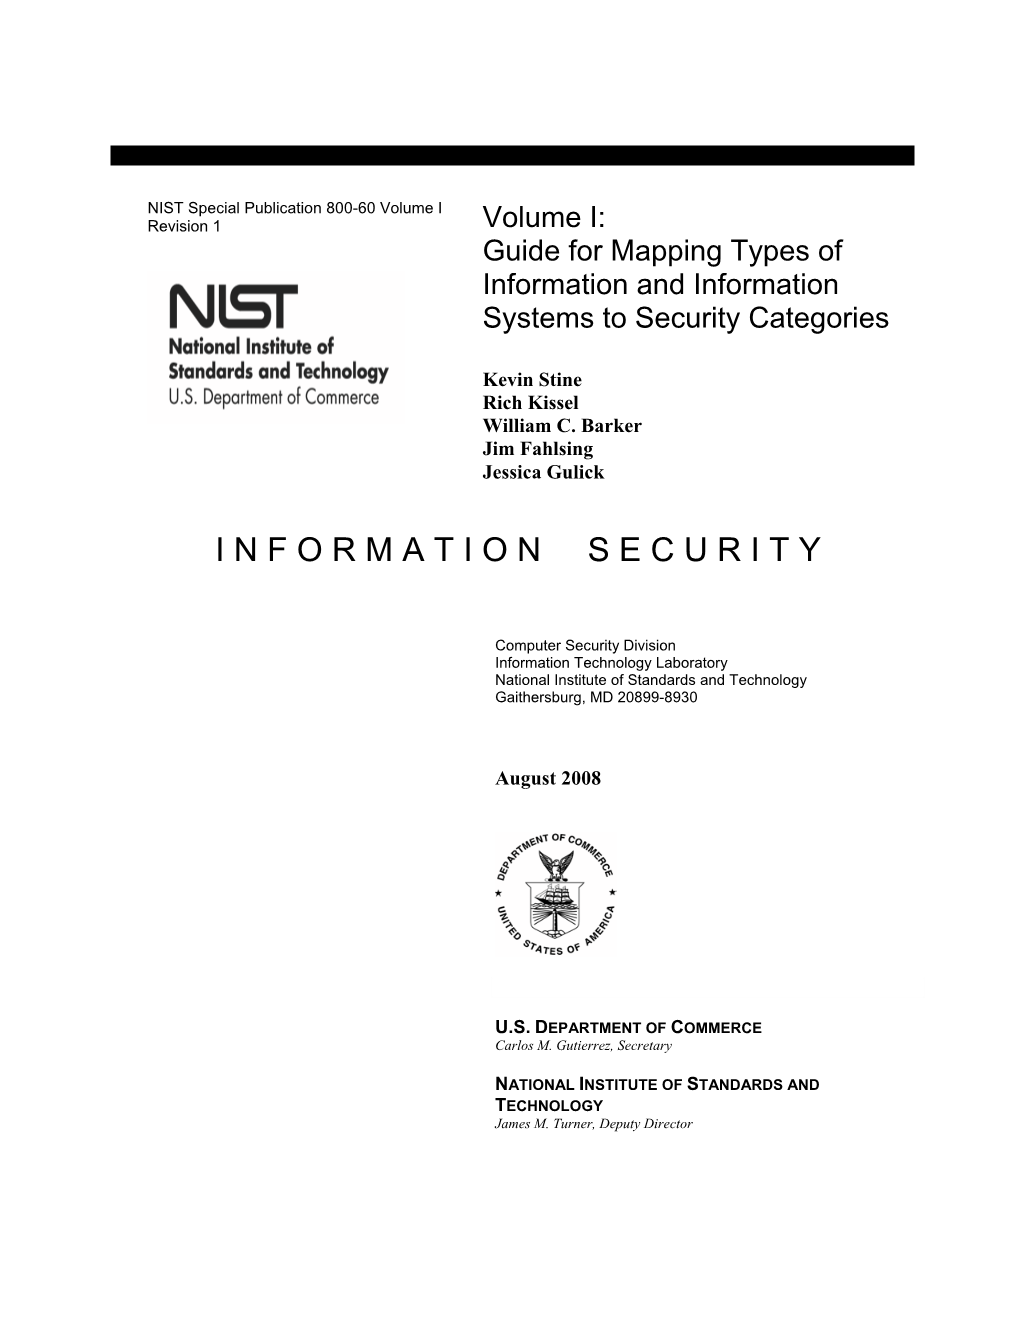 Volume I: Guide for Mapping Types of Information and Information Systems to Security Categories